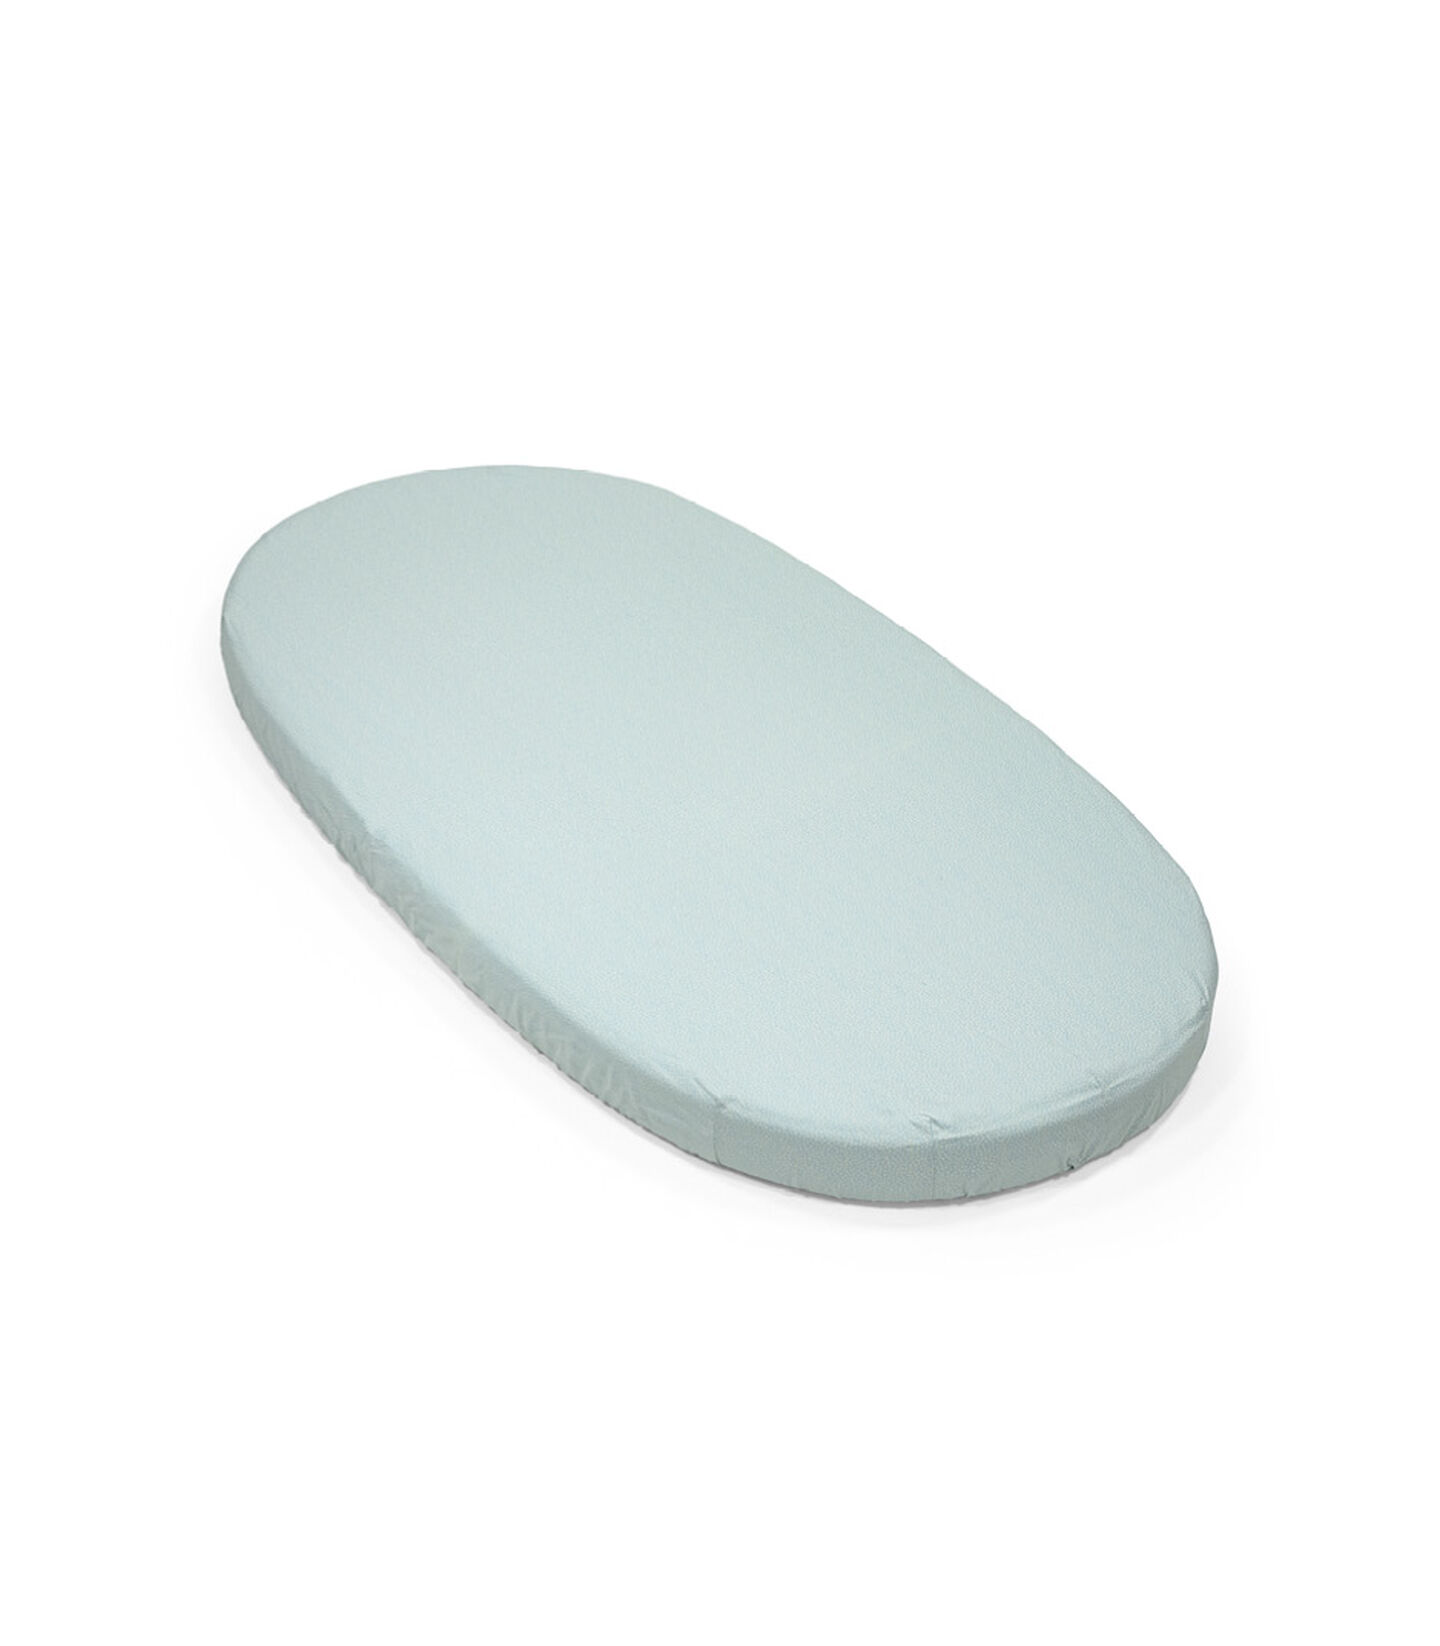 Stokke® Sleepi™ Bed Mattress with Fitted Sheet Dots Sage. view 1